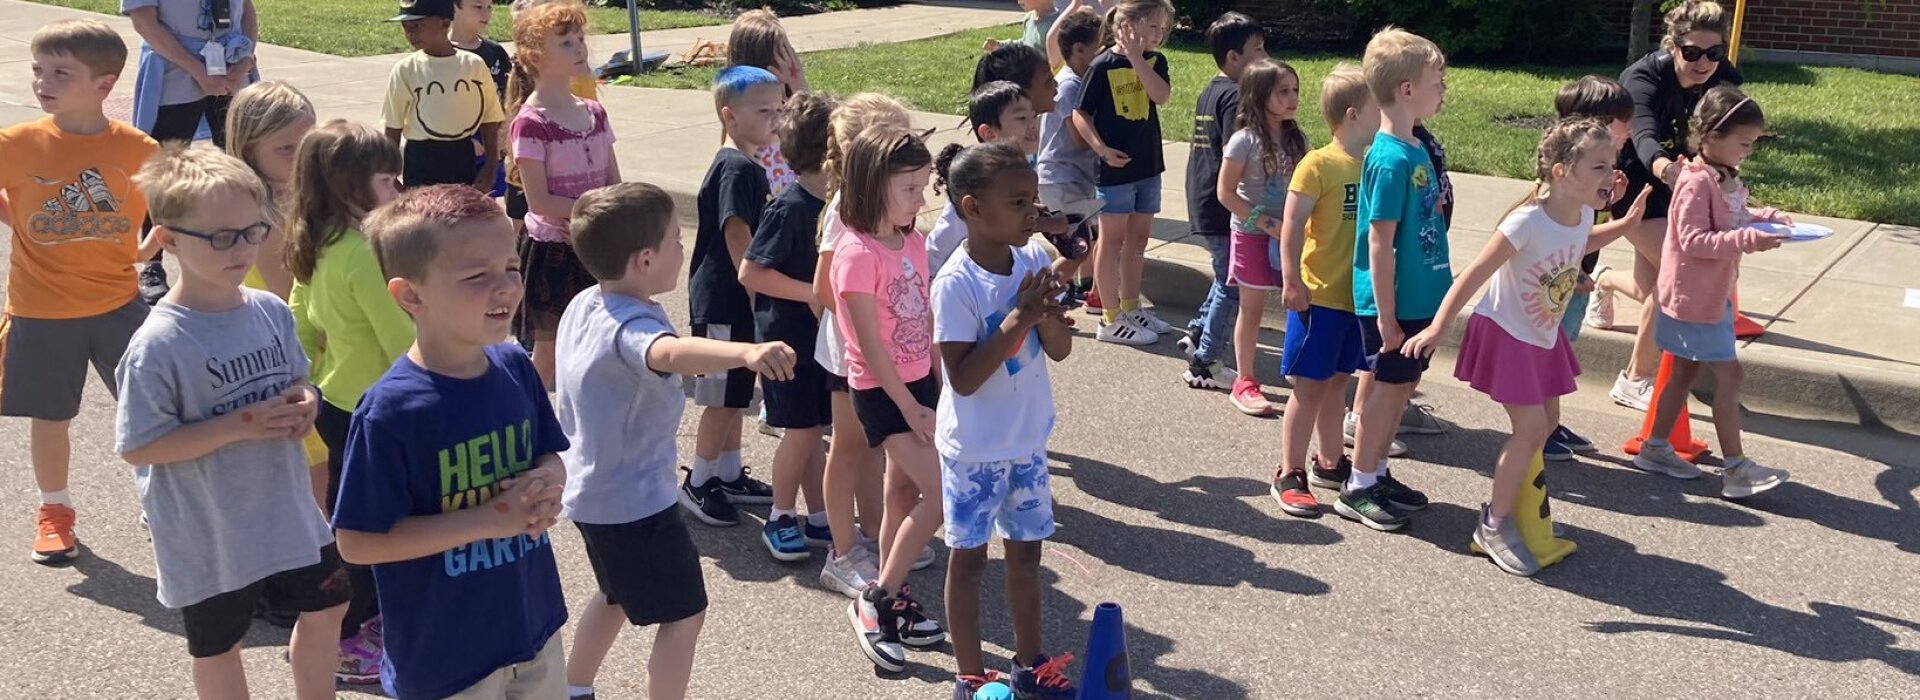 Summit students participate in a field day event